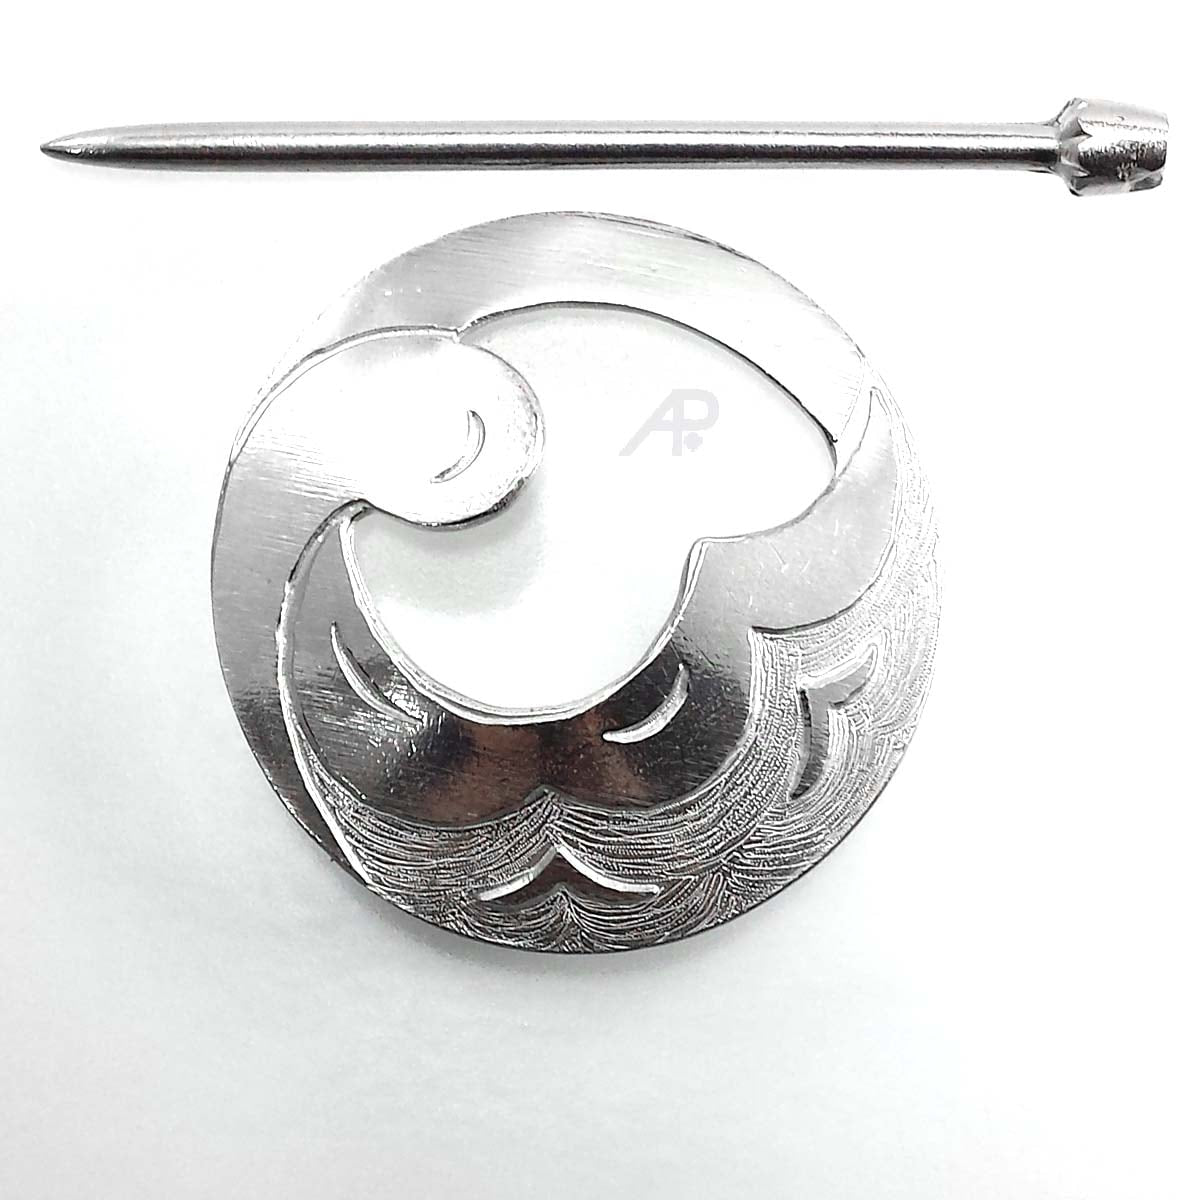 Pewter Shawl Pins by Atlantic Pewter